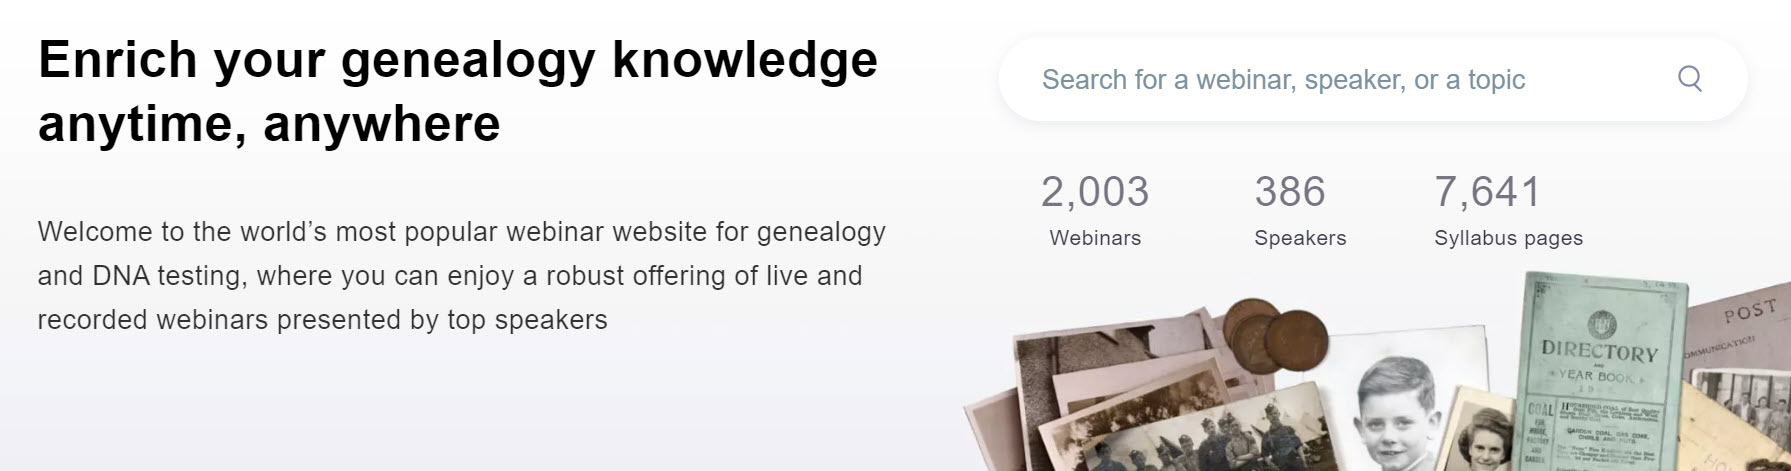 Legacy Family Tree Webinars is the world’s most popular webinar website for genealogy webinars, where you can enjoy a robust offering of live and recorded genealogy webinars presented by top speakers. Check out the FREE genealogy webinars listed below. The webinars offered by Legacy Family Tree Webinars are recorded and available for FREE for the 7-day period AFTER the live event.